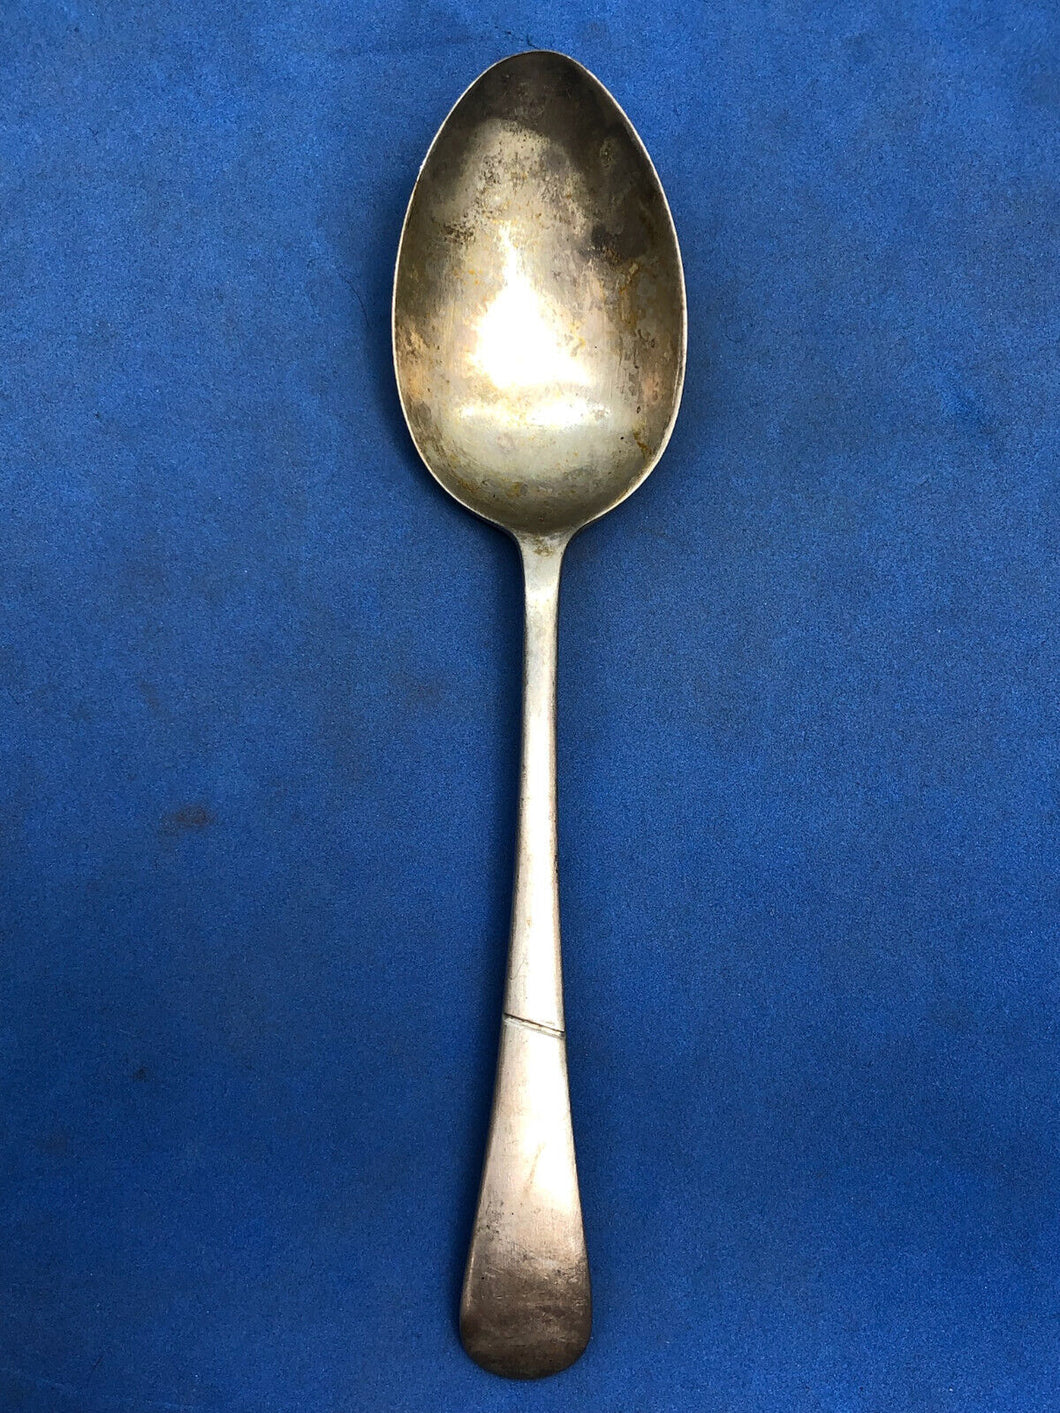 Original WW2 British Army Officers Mess WD Marked Cutlery Spoon - 1940